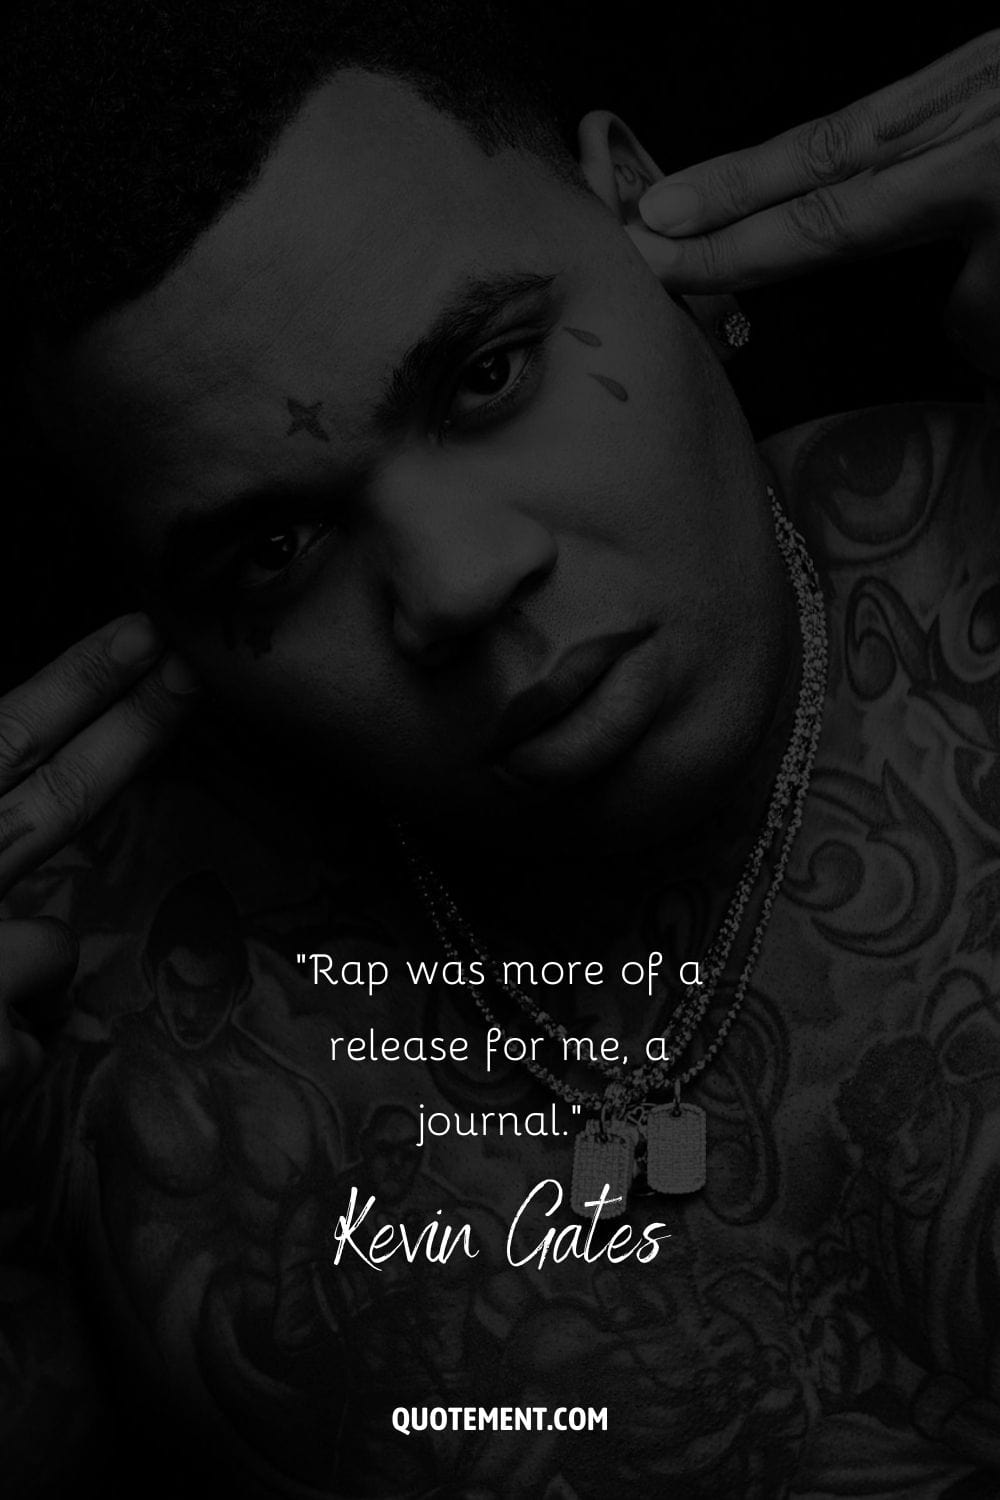 “Rap was more of a release for me, a journal.” – Kevin Gates